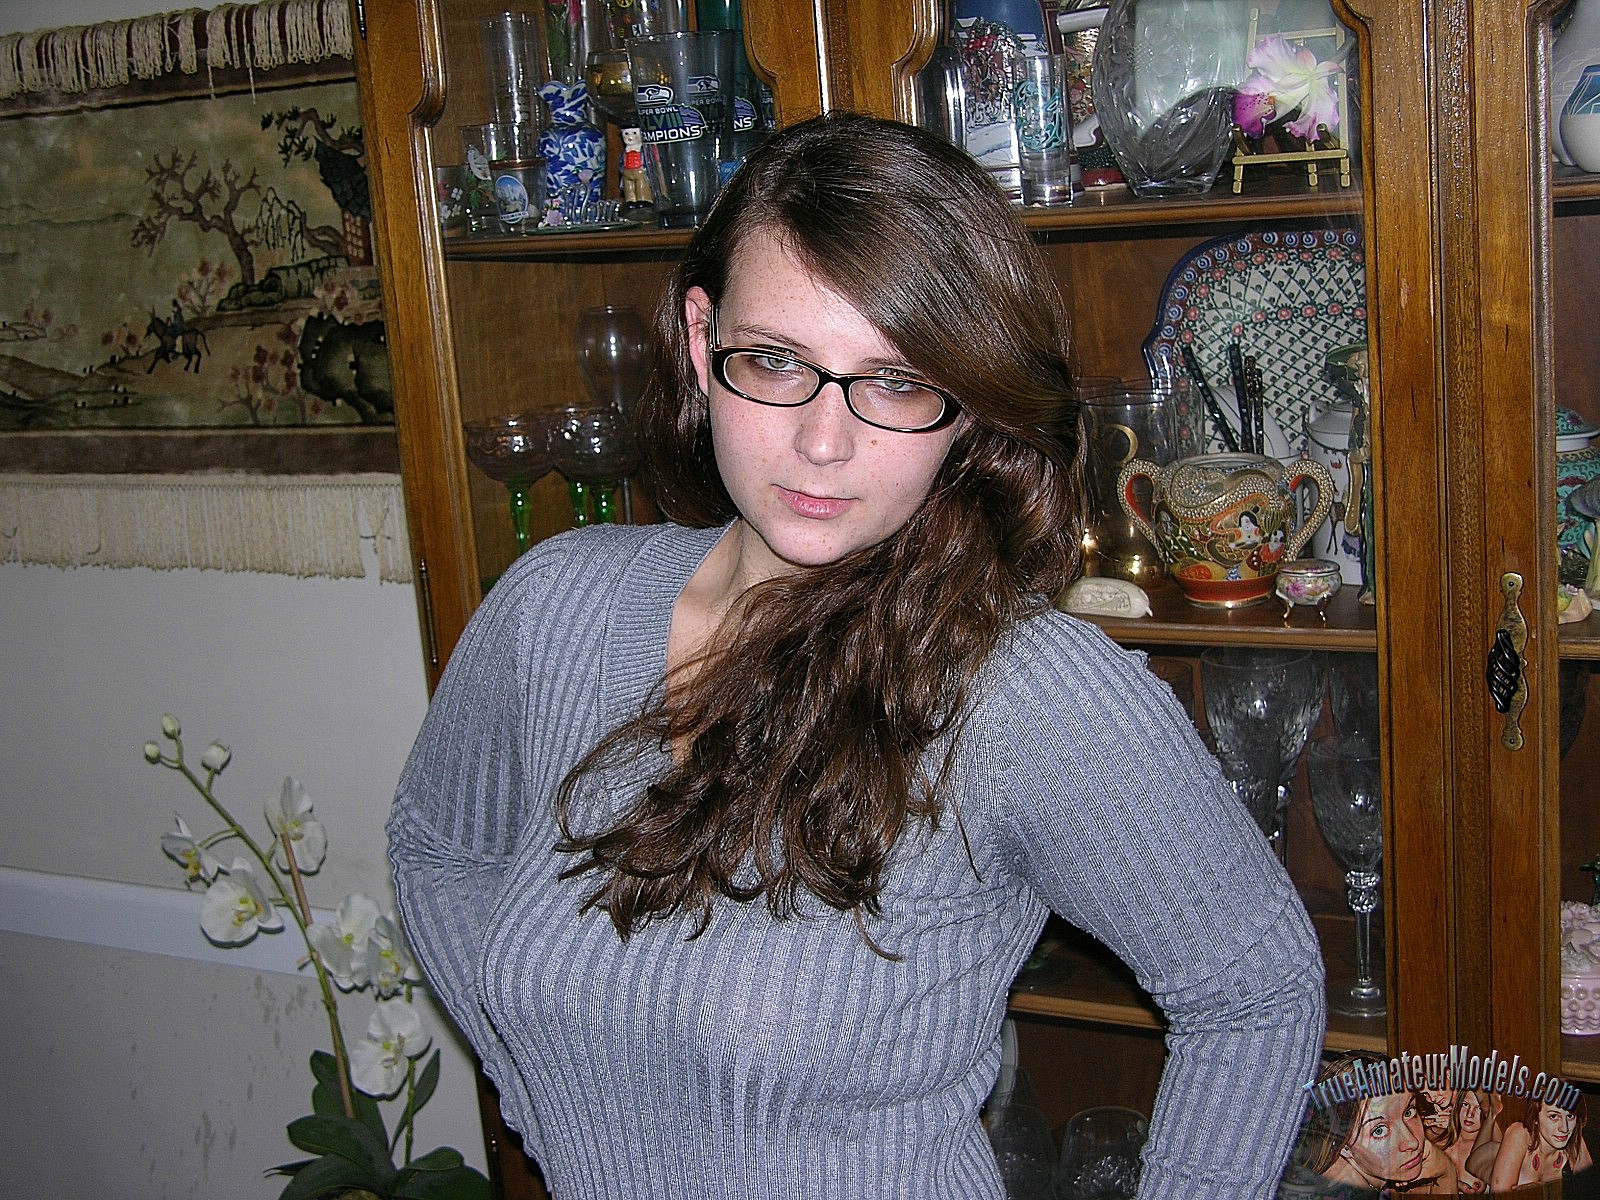 Nerdy amateur teen Skyye wearing glasses gets undressed and spreads her pussy